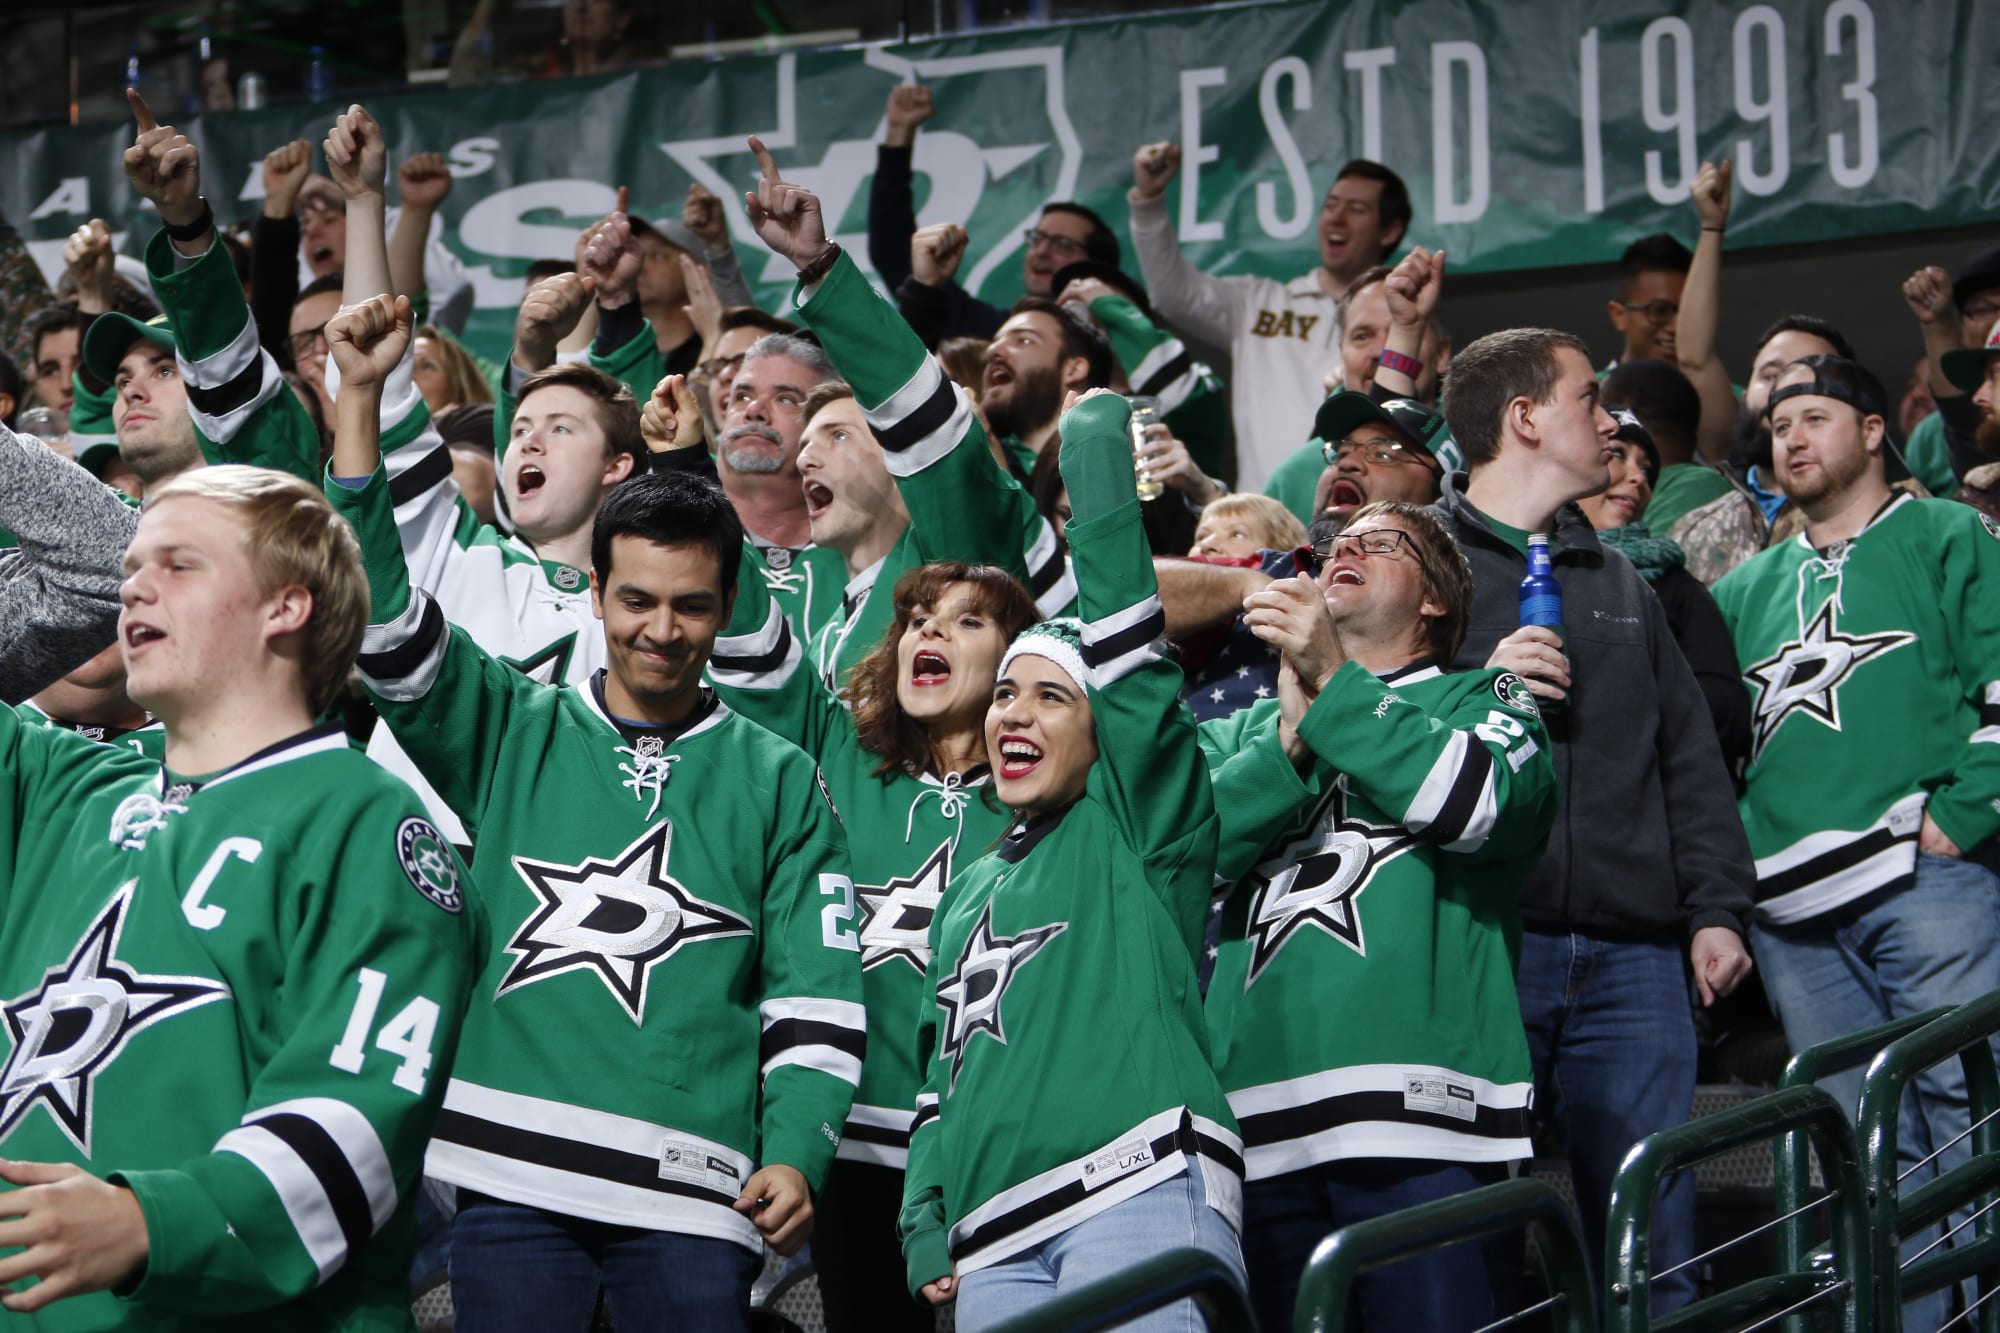 dallas-stars-single-game-tickets-for-2017-18-season-now-on-sale